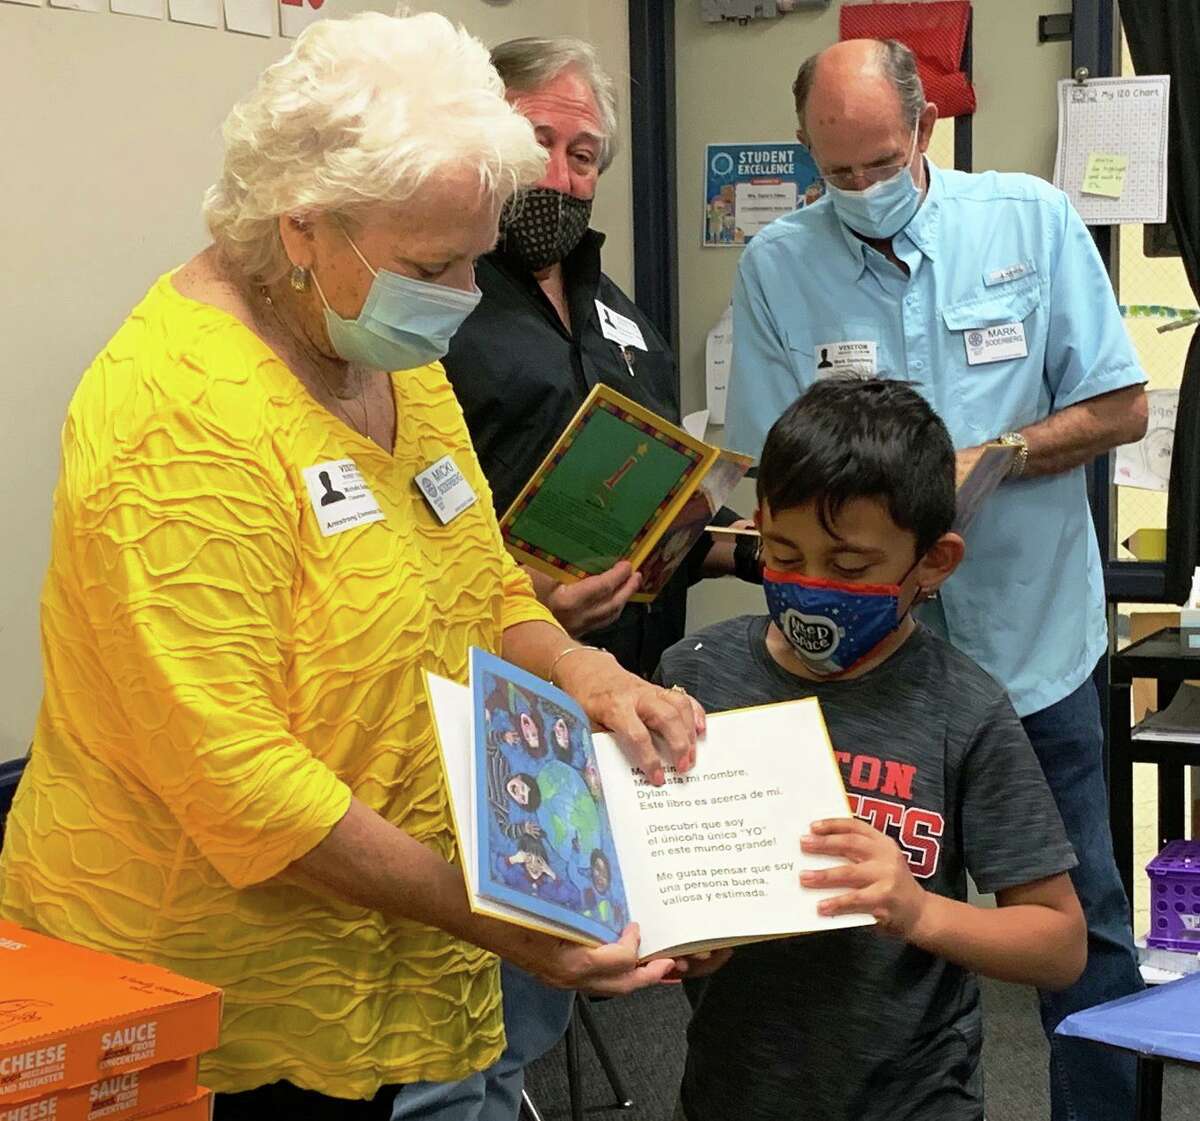 Conroe Rotarian Micki Soderberg is pictured with Lamar Casparis and Mark Soderberg presenting an "I Like Me" book to a Conroe ISD first grader.